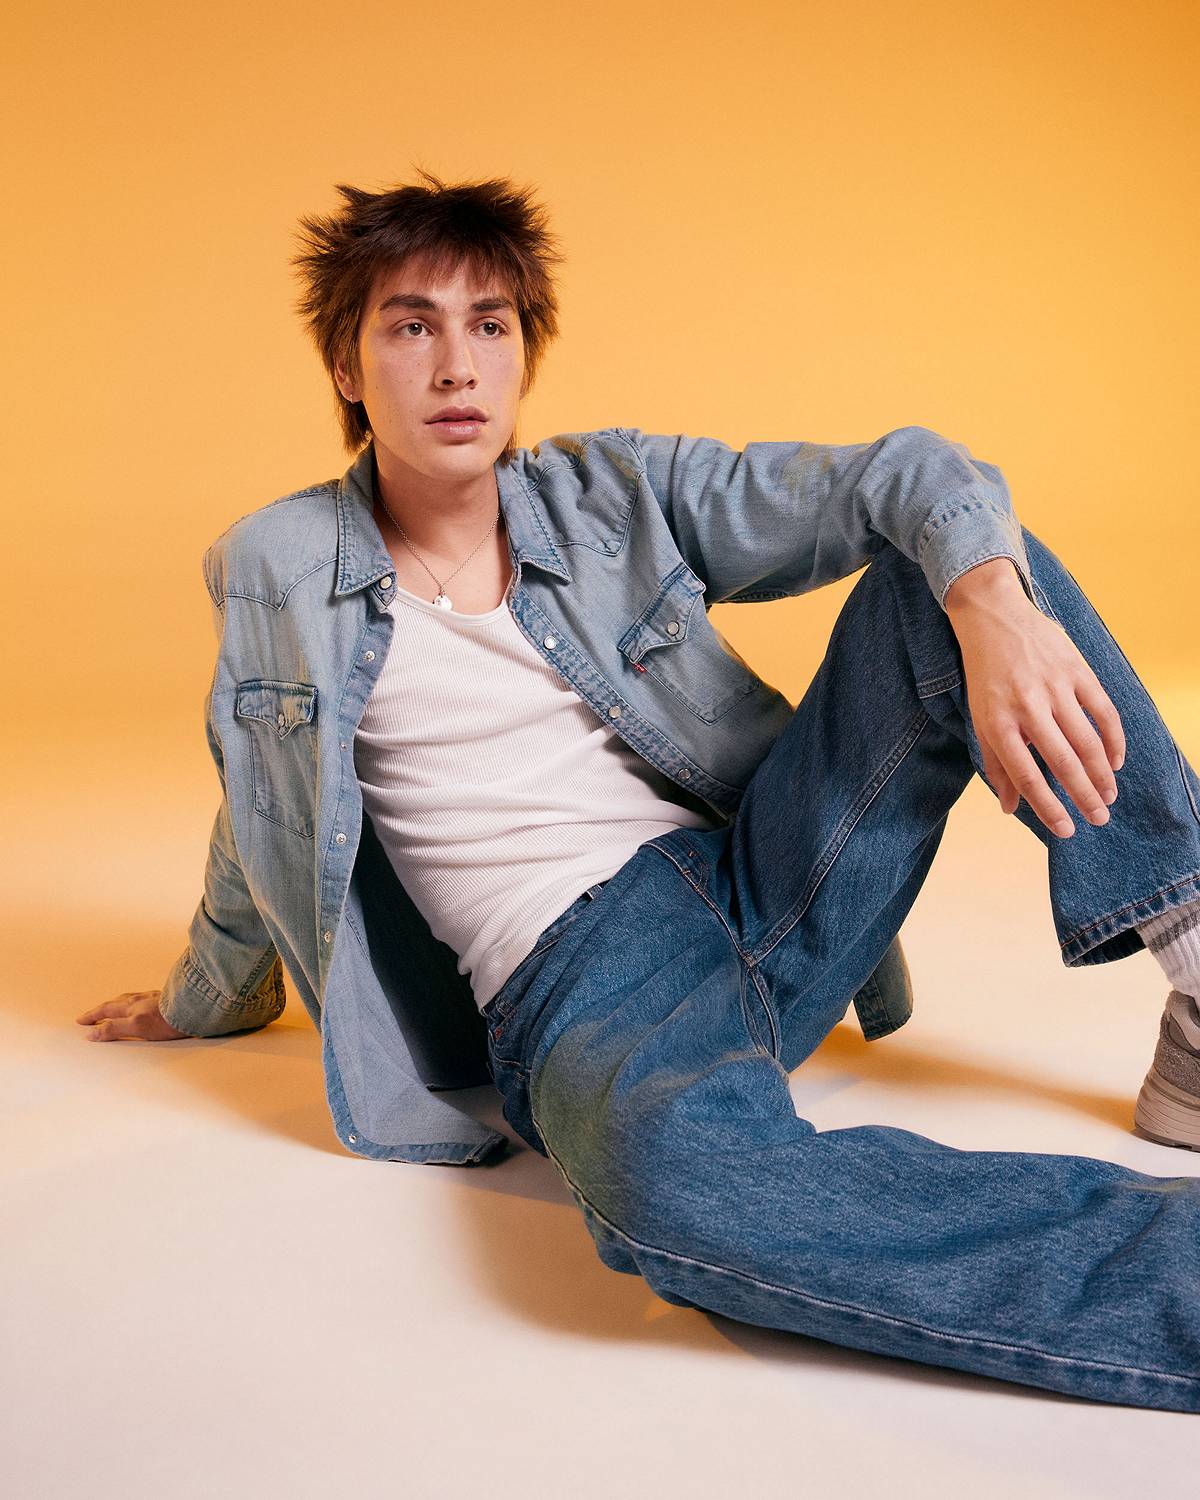 Model against a yellow background in an all denim outfit